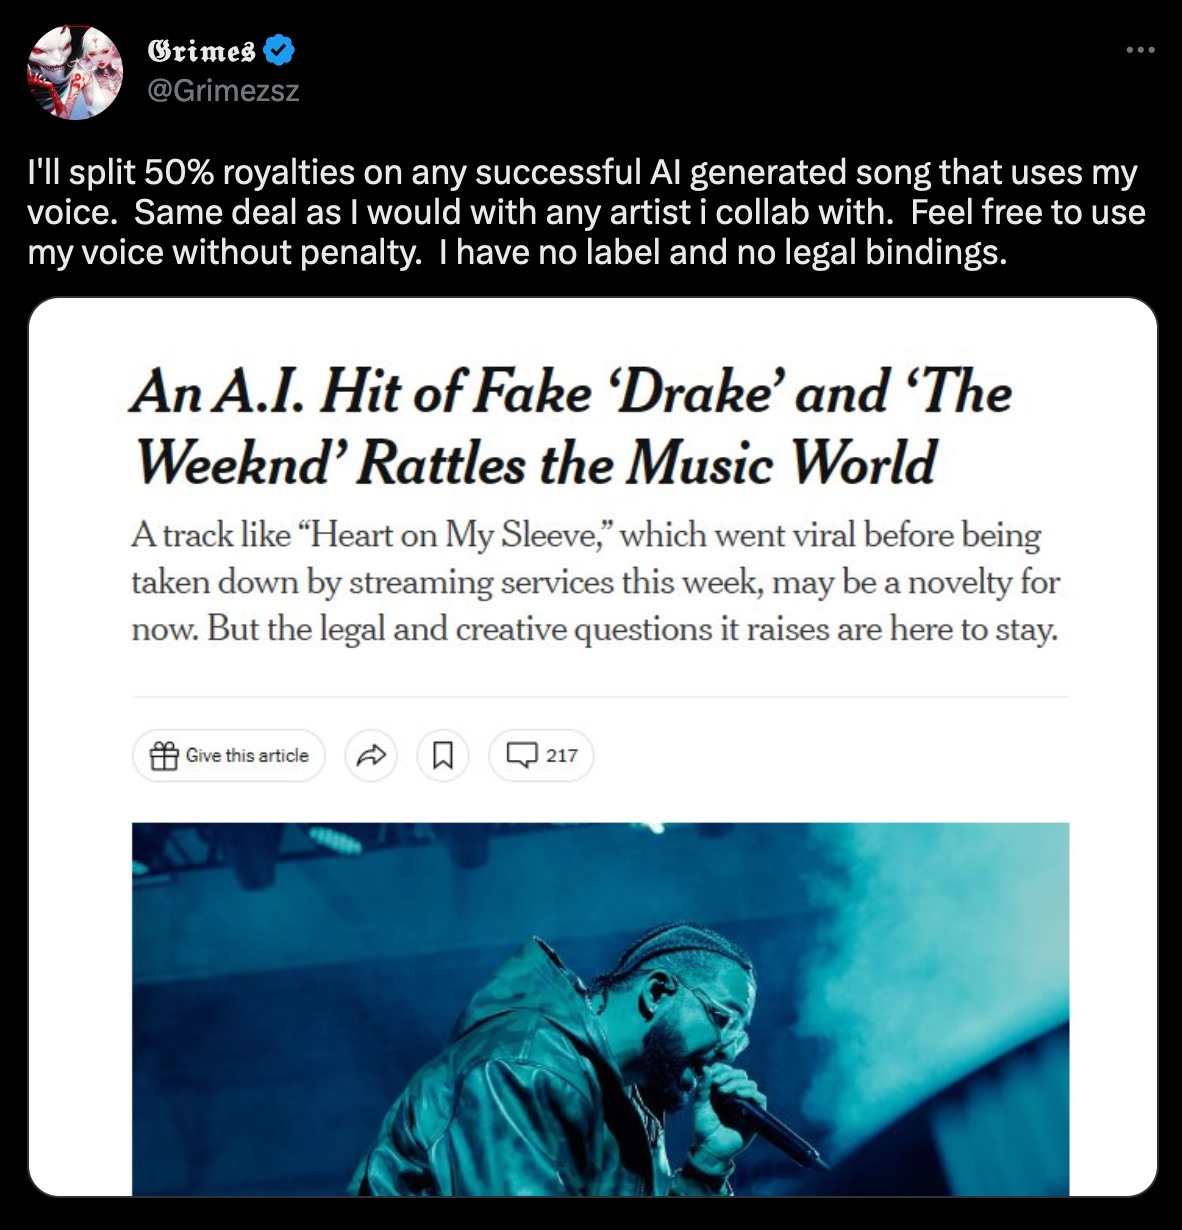 Artist Grimez offered a 50% royalty split on any successful AI-generated song that uses his voice, in response to AI-generated Heart on My Sleeve by Drake and The Weeknd.